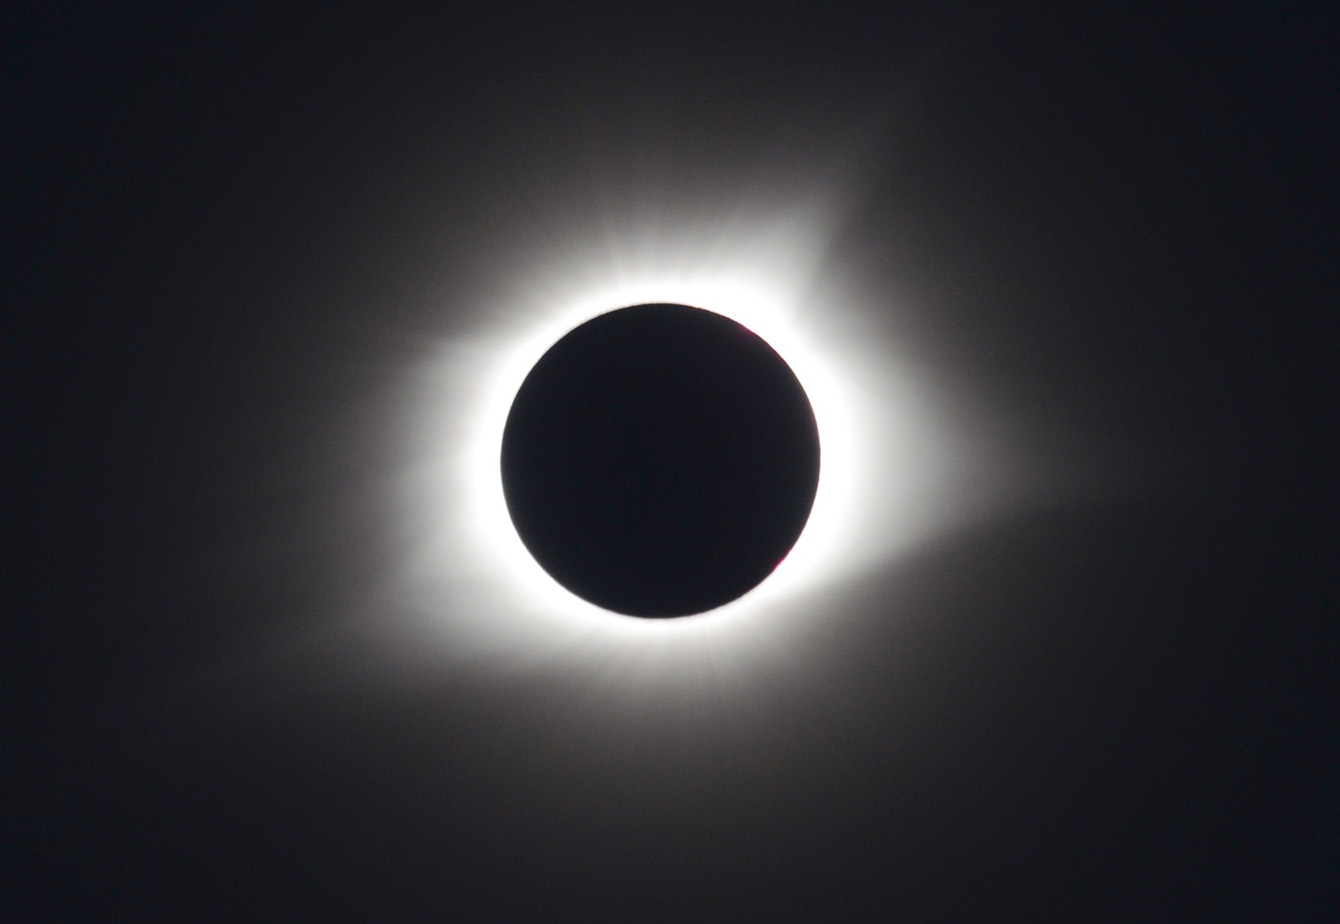 total eclipse - what looks like a black circle outlined in white radiating light